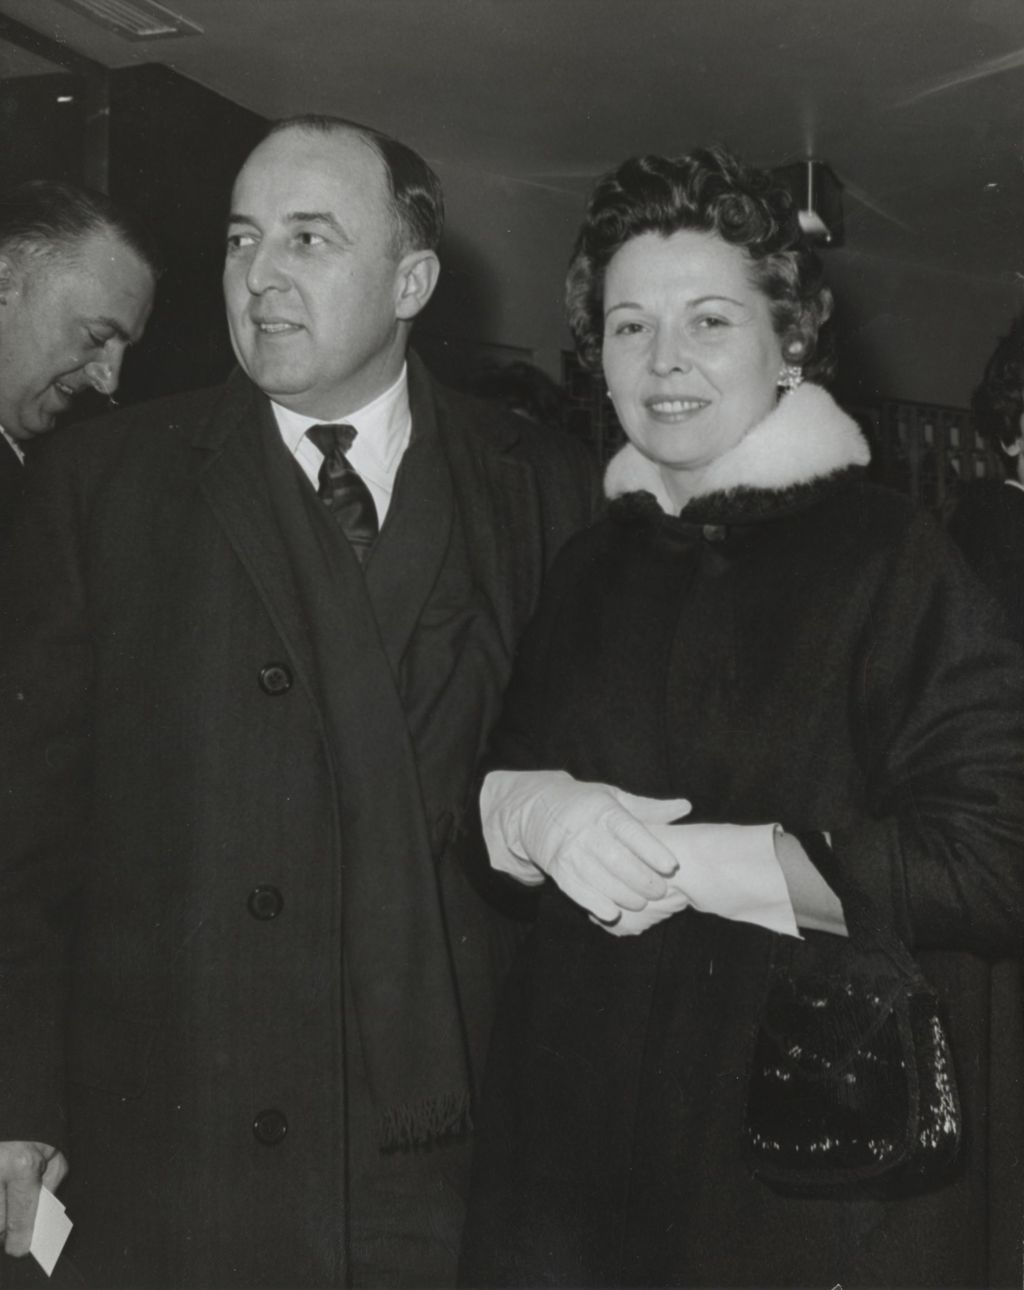 Author and journalist Emmett Dedmon and his wife, Claire Lyons Dedmon, at the Chicago premiere of the film West Side Story at the Michael Todd Theatre. The premiere was a benefit for Hull-House